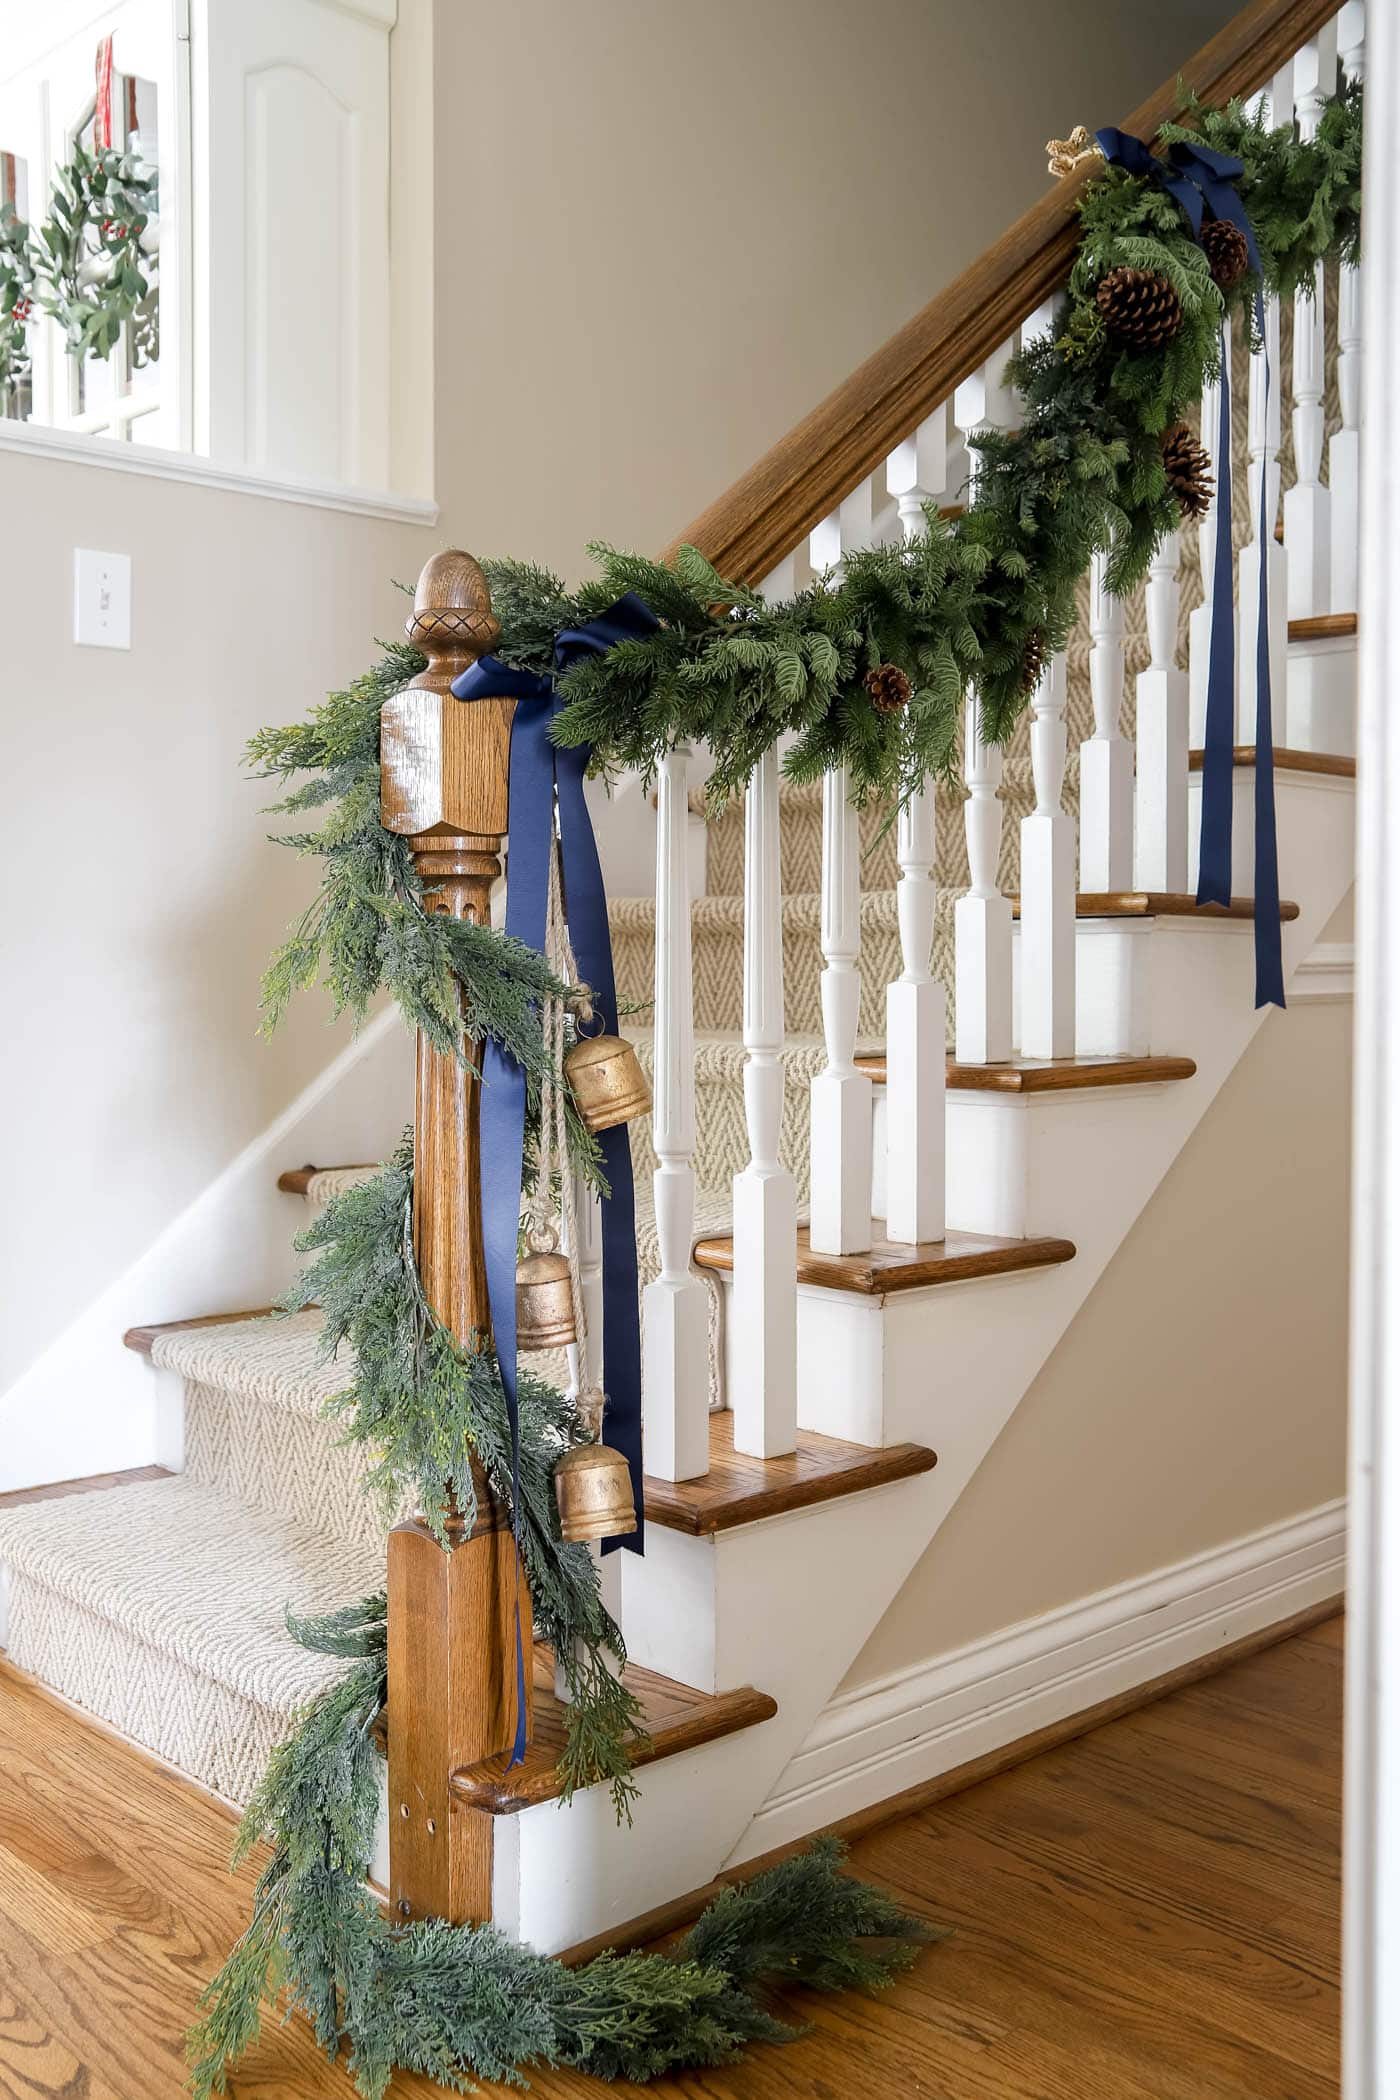 How To Hang Garland On the Stairs